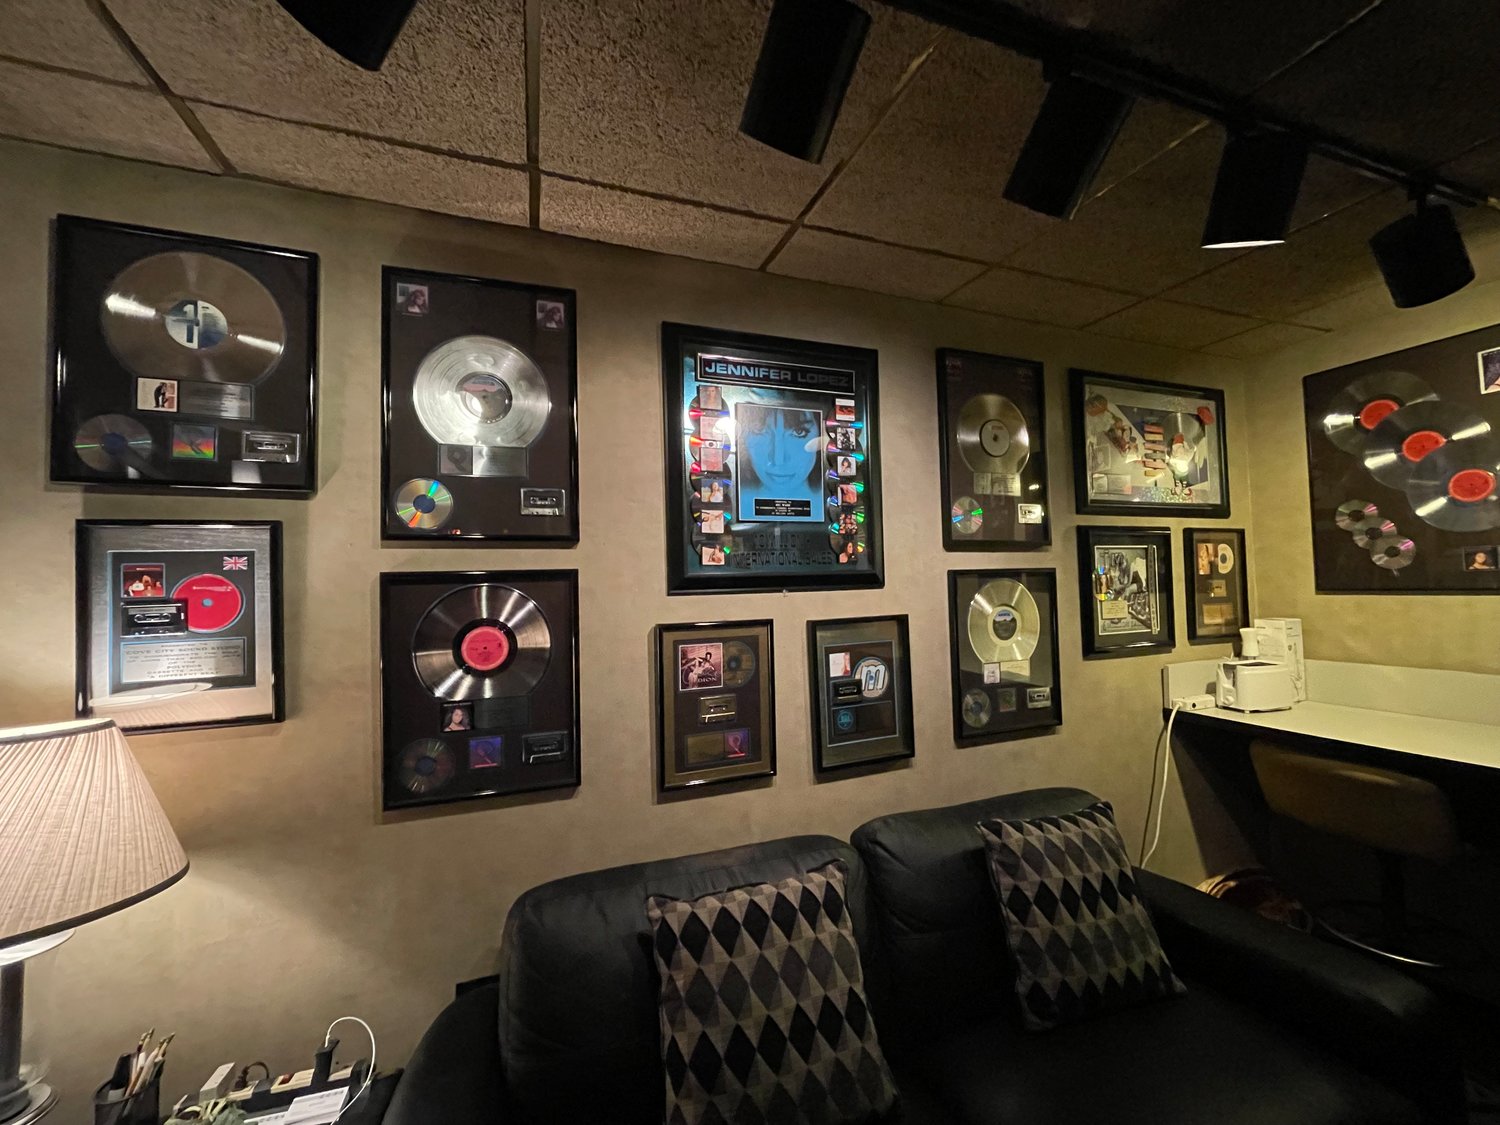 A strong believer in sticking to your roots, Marz and his team work out of Cove City Sound Studios in Glen Cove when he’s in New York. The recording studio is well           known — many stars in the industry have produced music and recorded albums there.